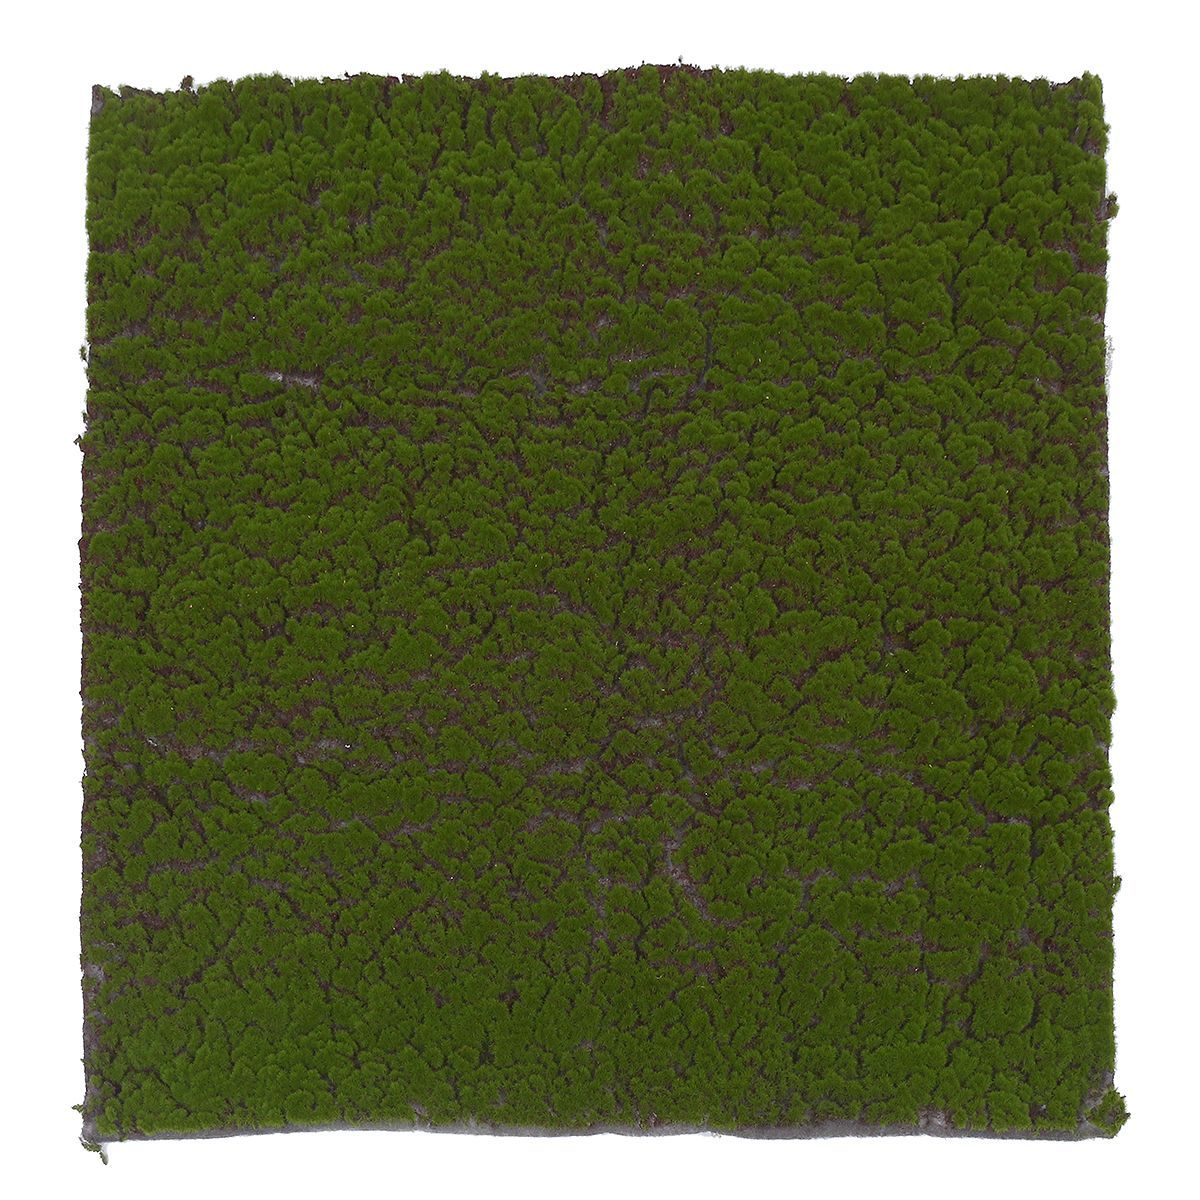 Synthetic-Grass-Faux-Artificial-Moss-Linchen-Turf-Plant-Lawn-Patio-Home-Garden-Decorations-1474949